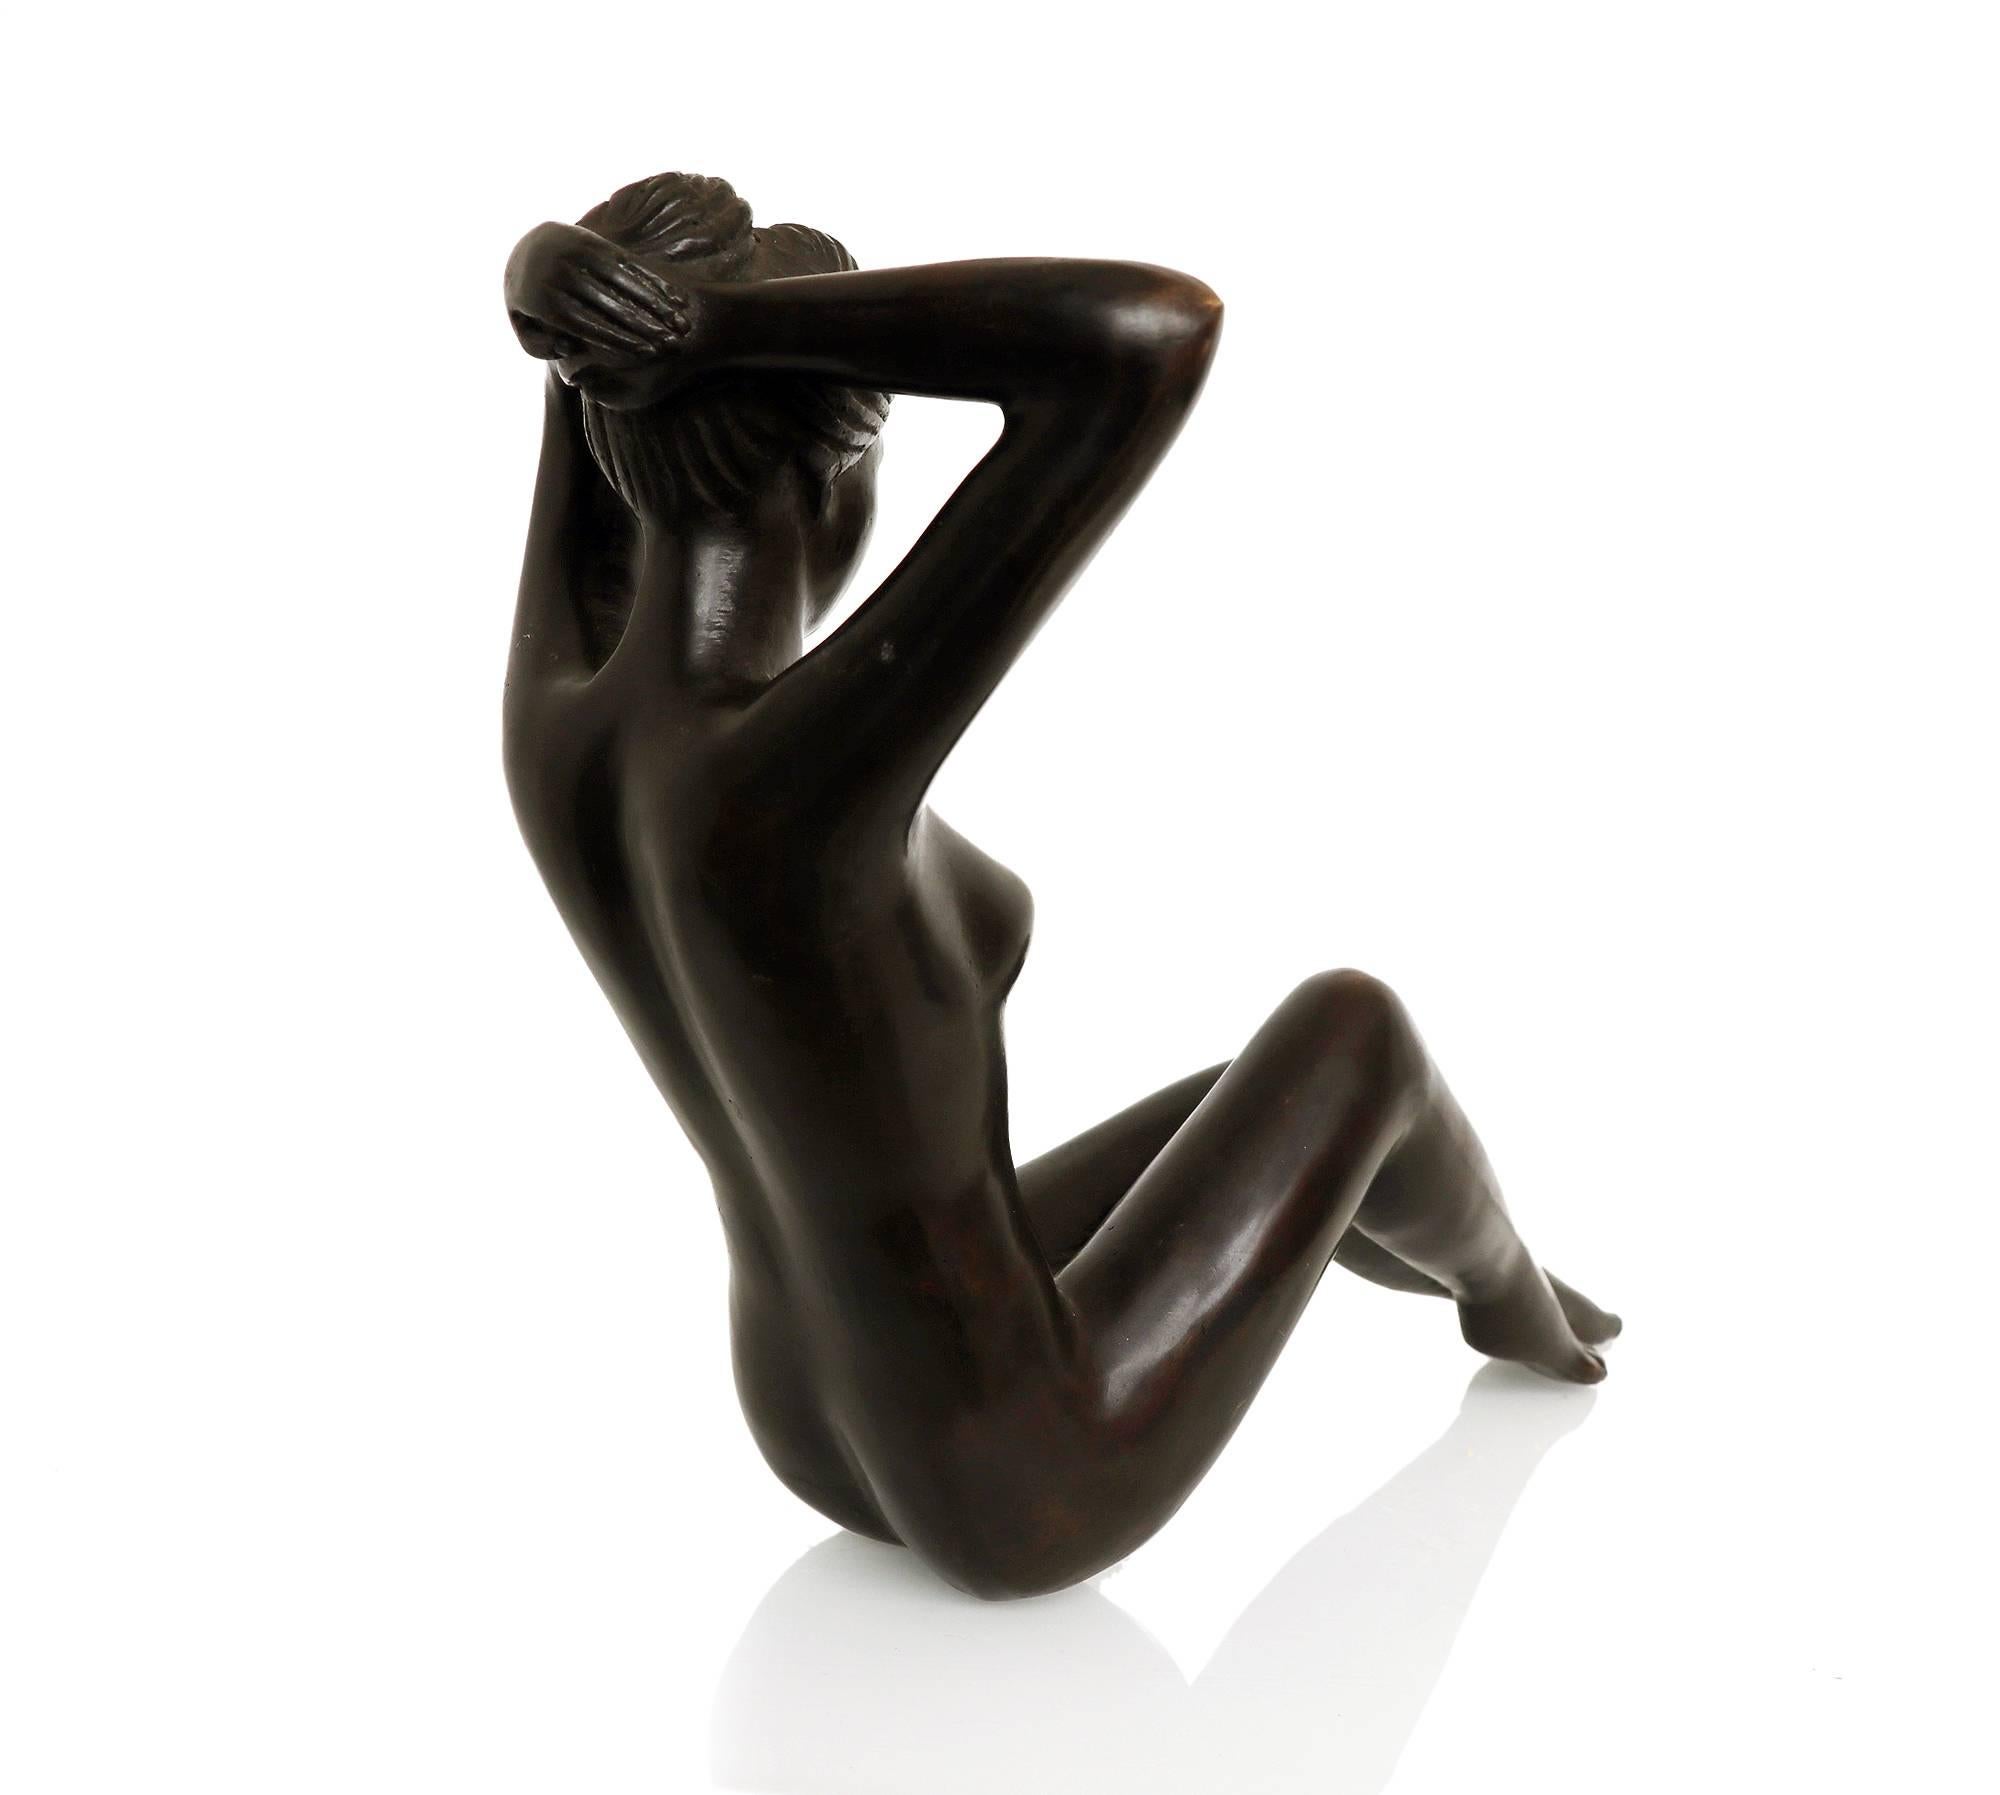 Beautiful female nude bronze sculpture, not signed.
Weight 4,45 lb / 2,02 kg
Dimensions 15.75 x 9.45 x 6.3 in. / 40 x 24 x 16 cm. 